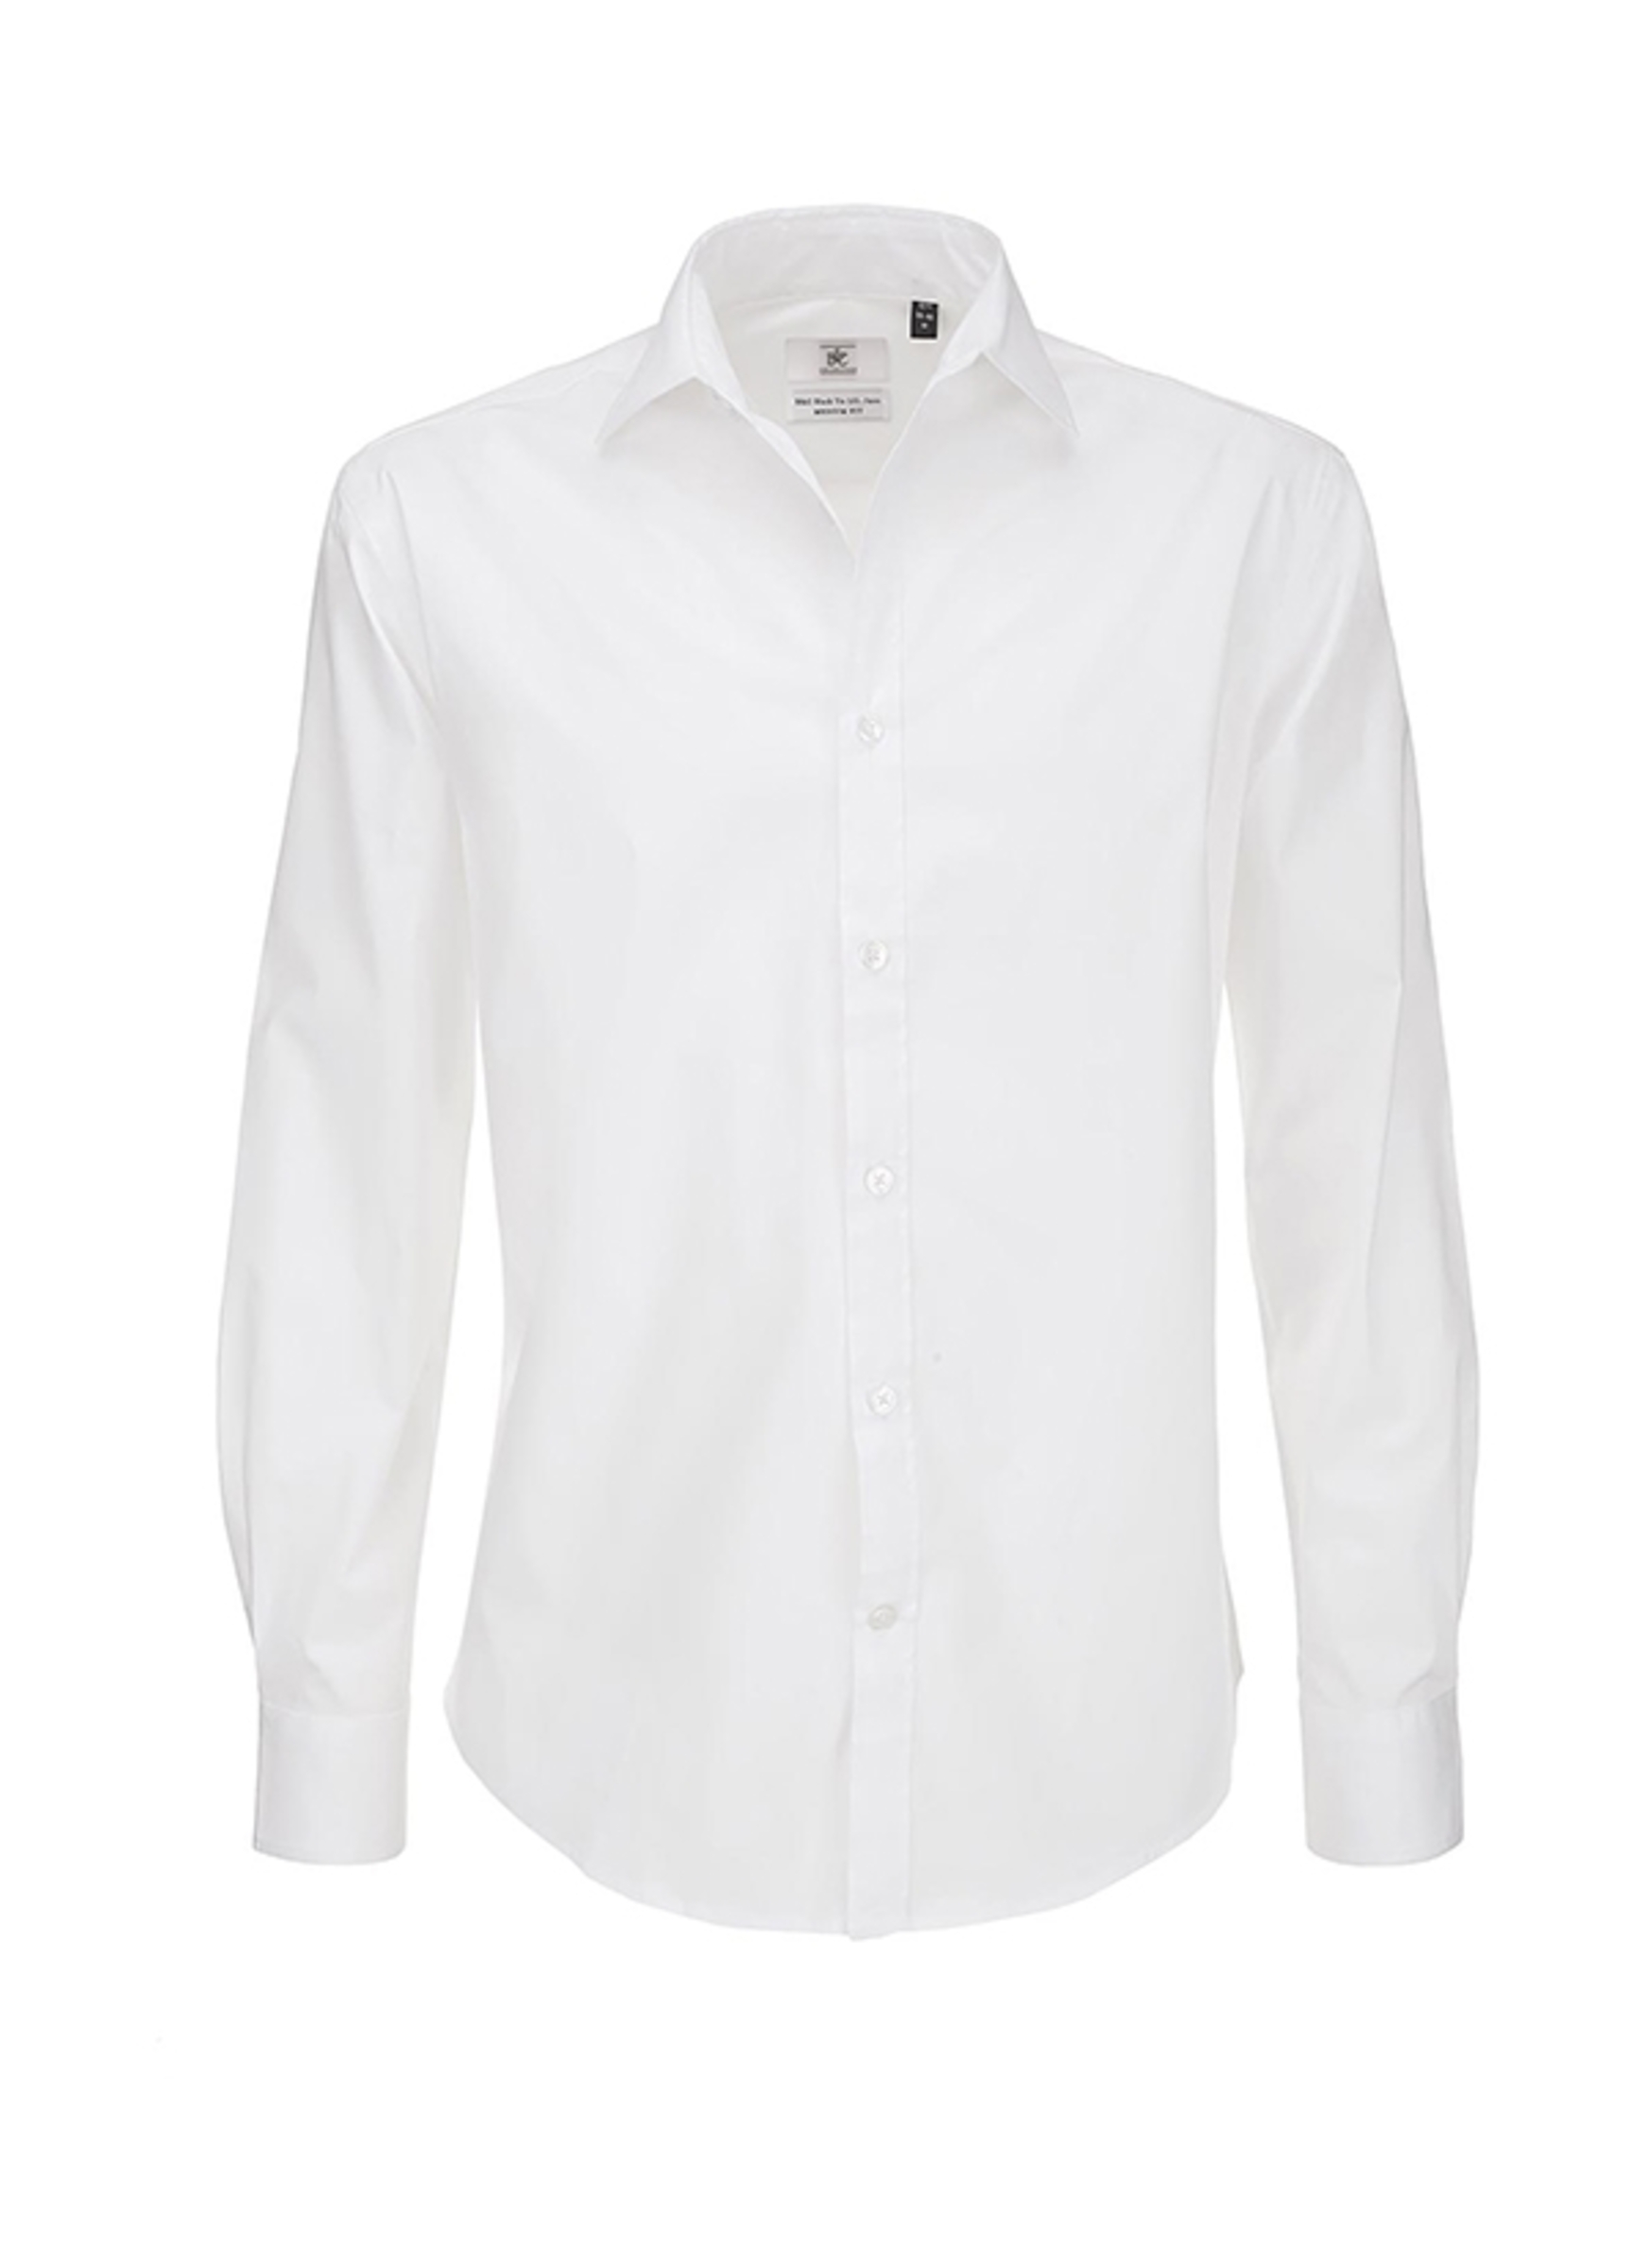 B And C Collection Black Tie Long Sleeve Shirt